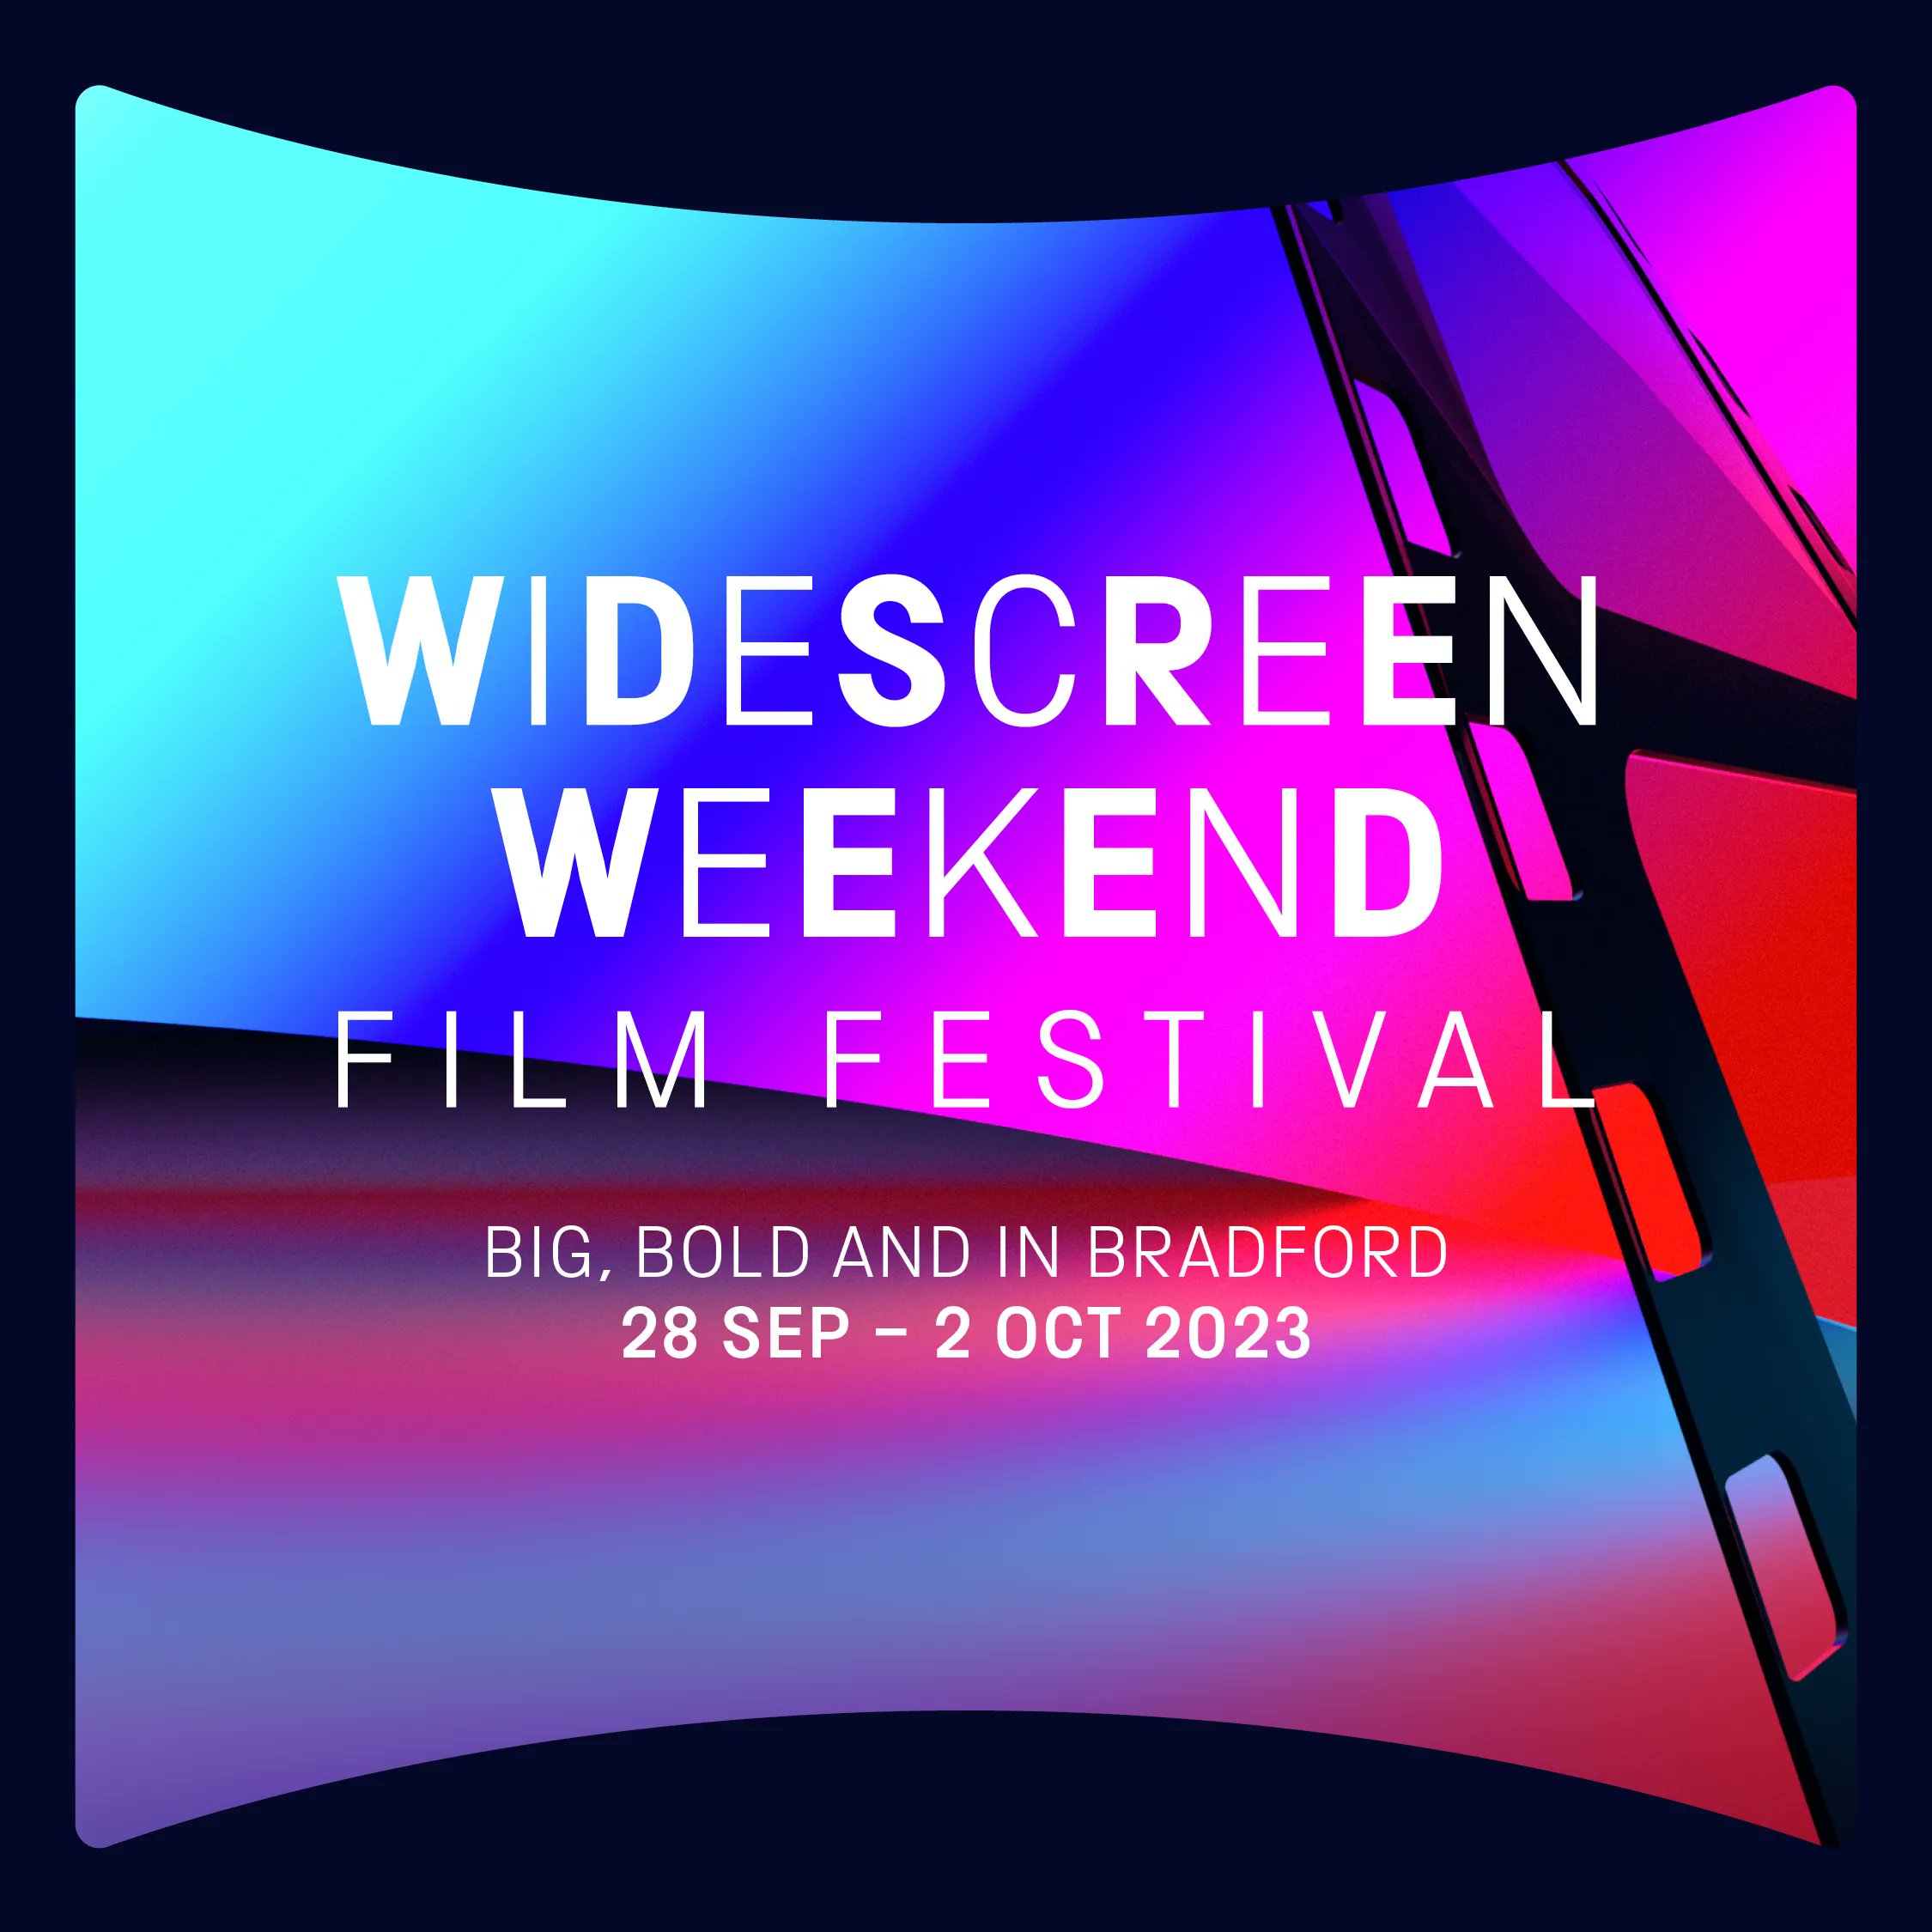 Widescreen Weekend Film Festival. Big bold and in Bradford. 28 Sep – 2 Oct 2023.